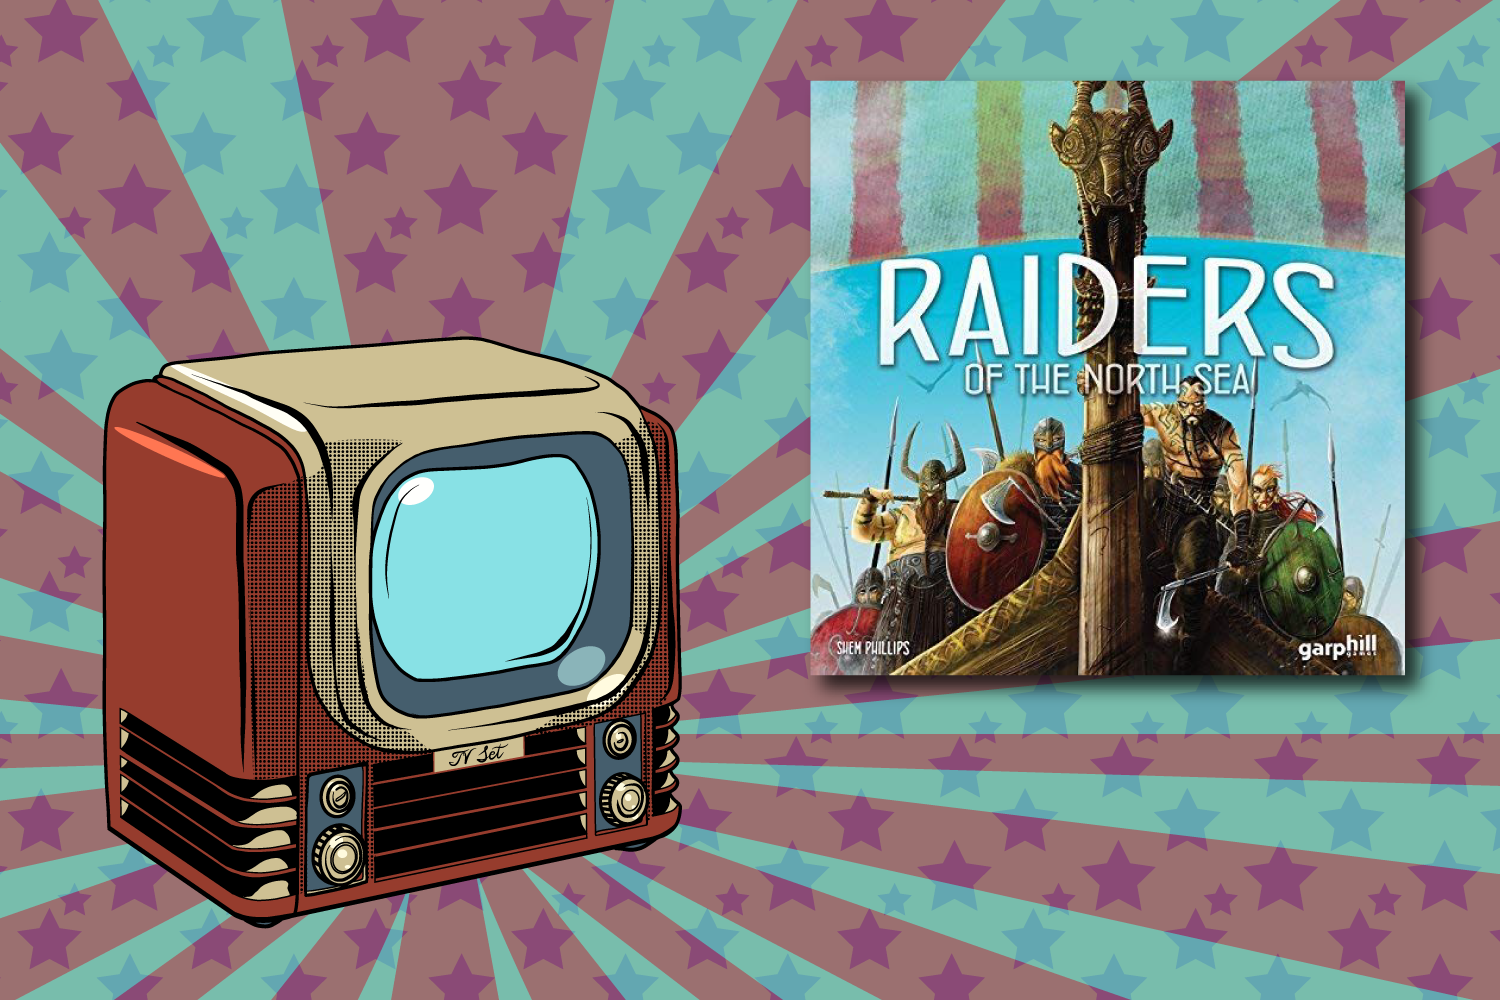 Raiders-of-the-North-Sea-Unboxing-Video